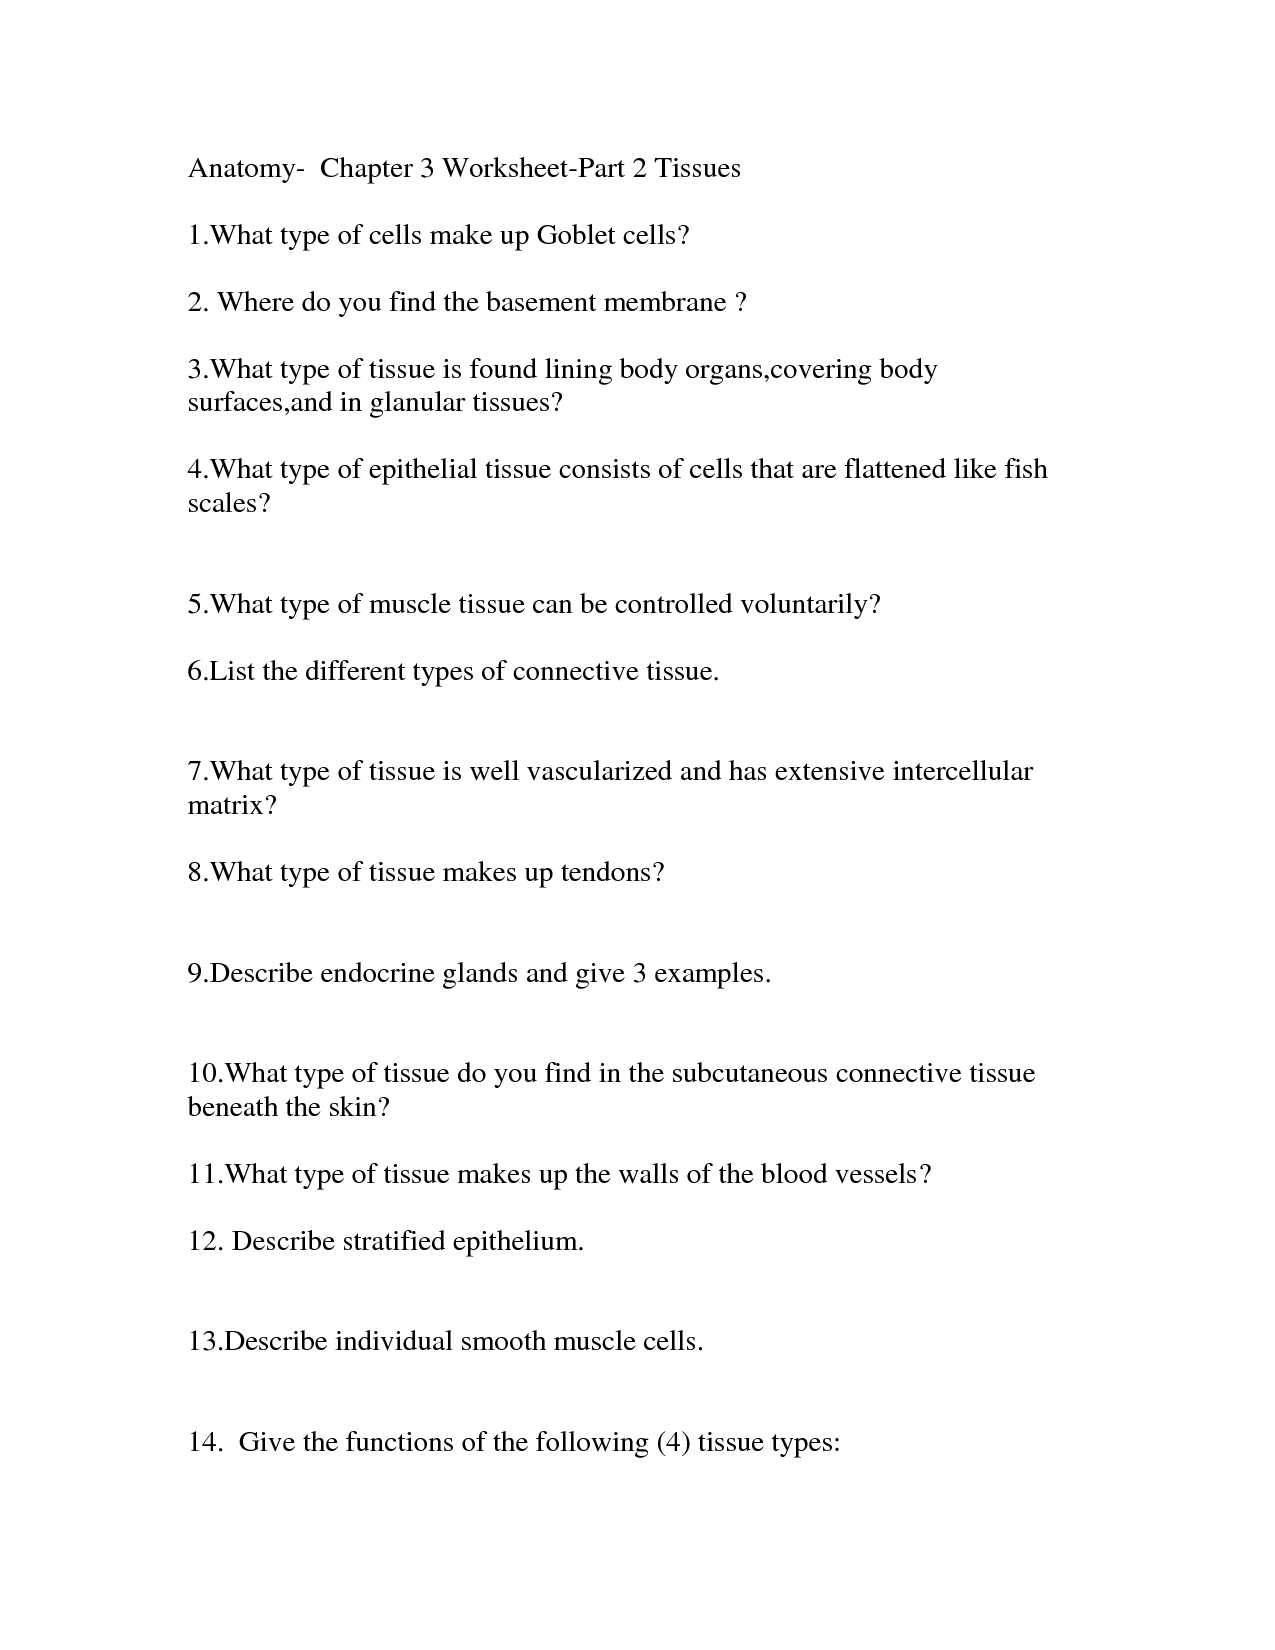 Reproductive Barriers Worksheet Answers with Gemütlich Anatomy and Physiology 1 Worksheet for Tissue Types